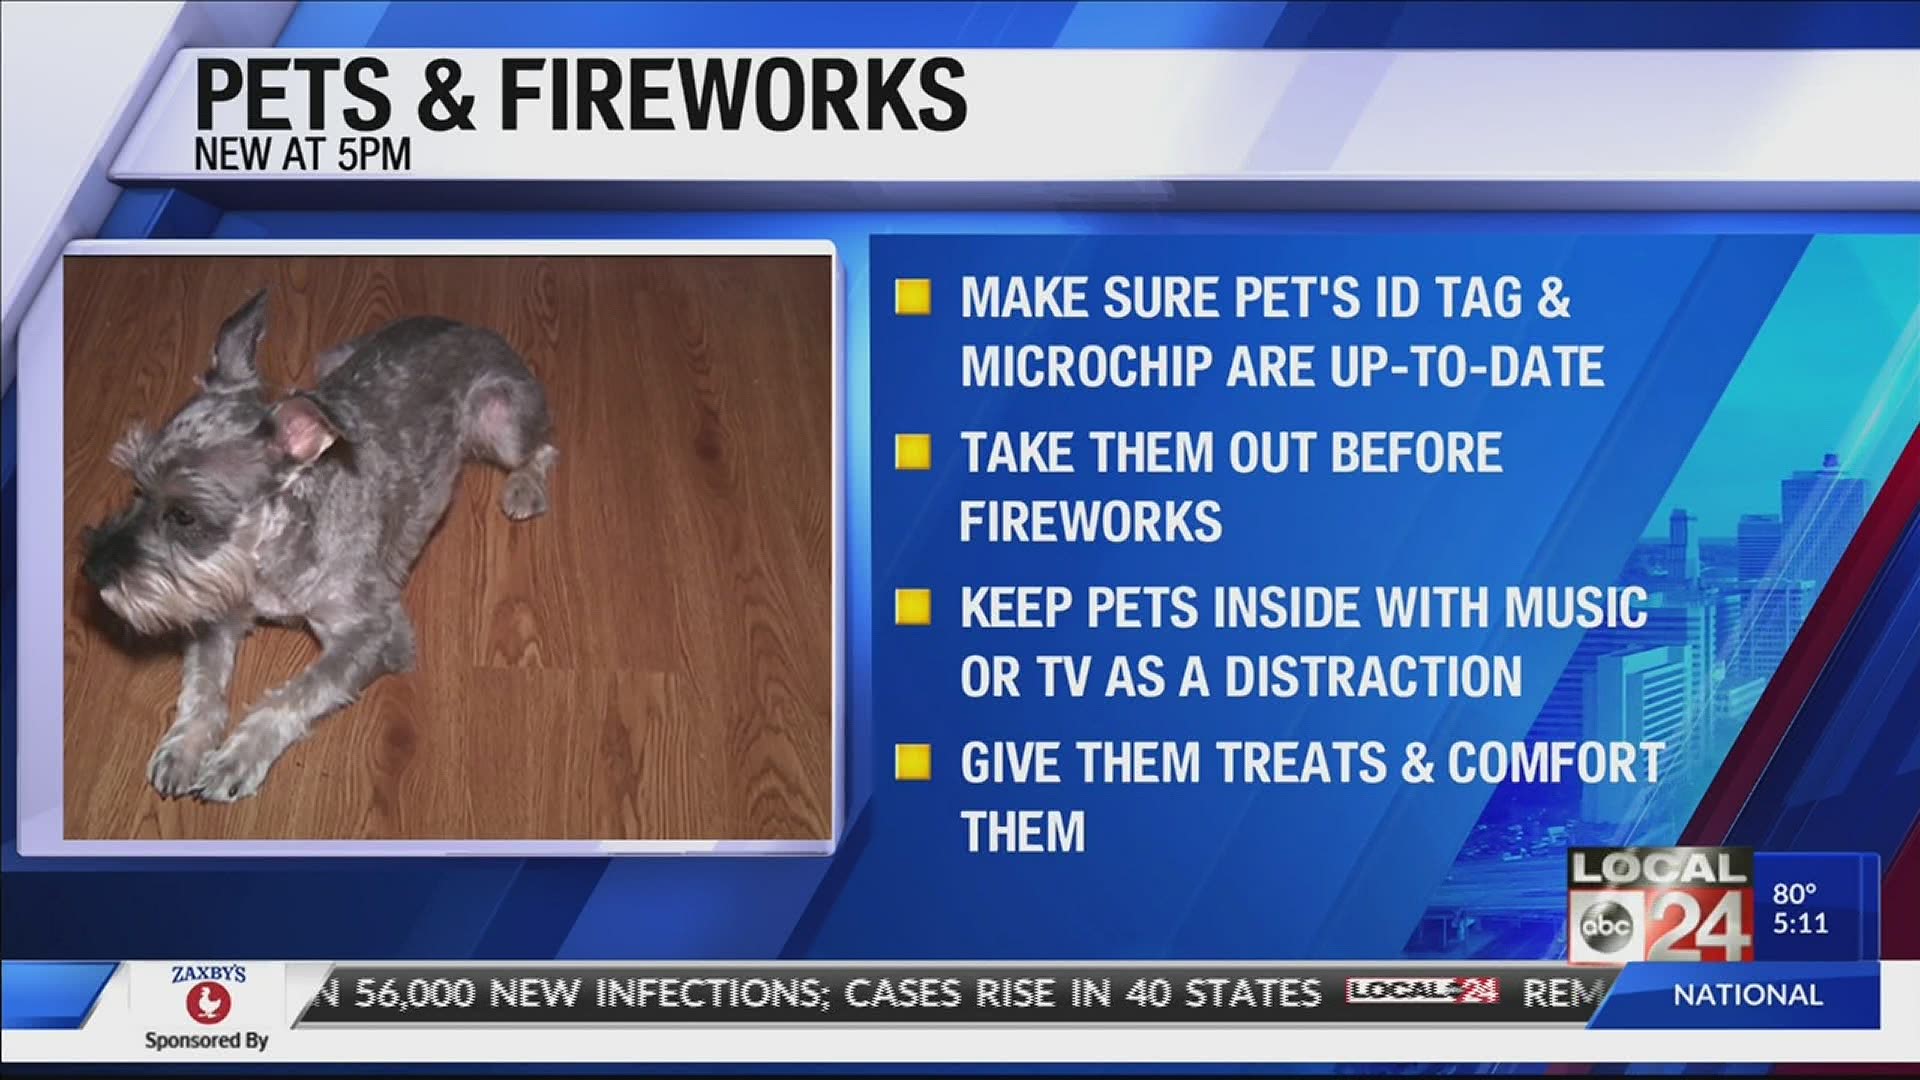 The high-pitched squeals, loud booms, and bright flashes from fireworks can send even the bravest dogs running